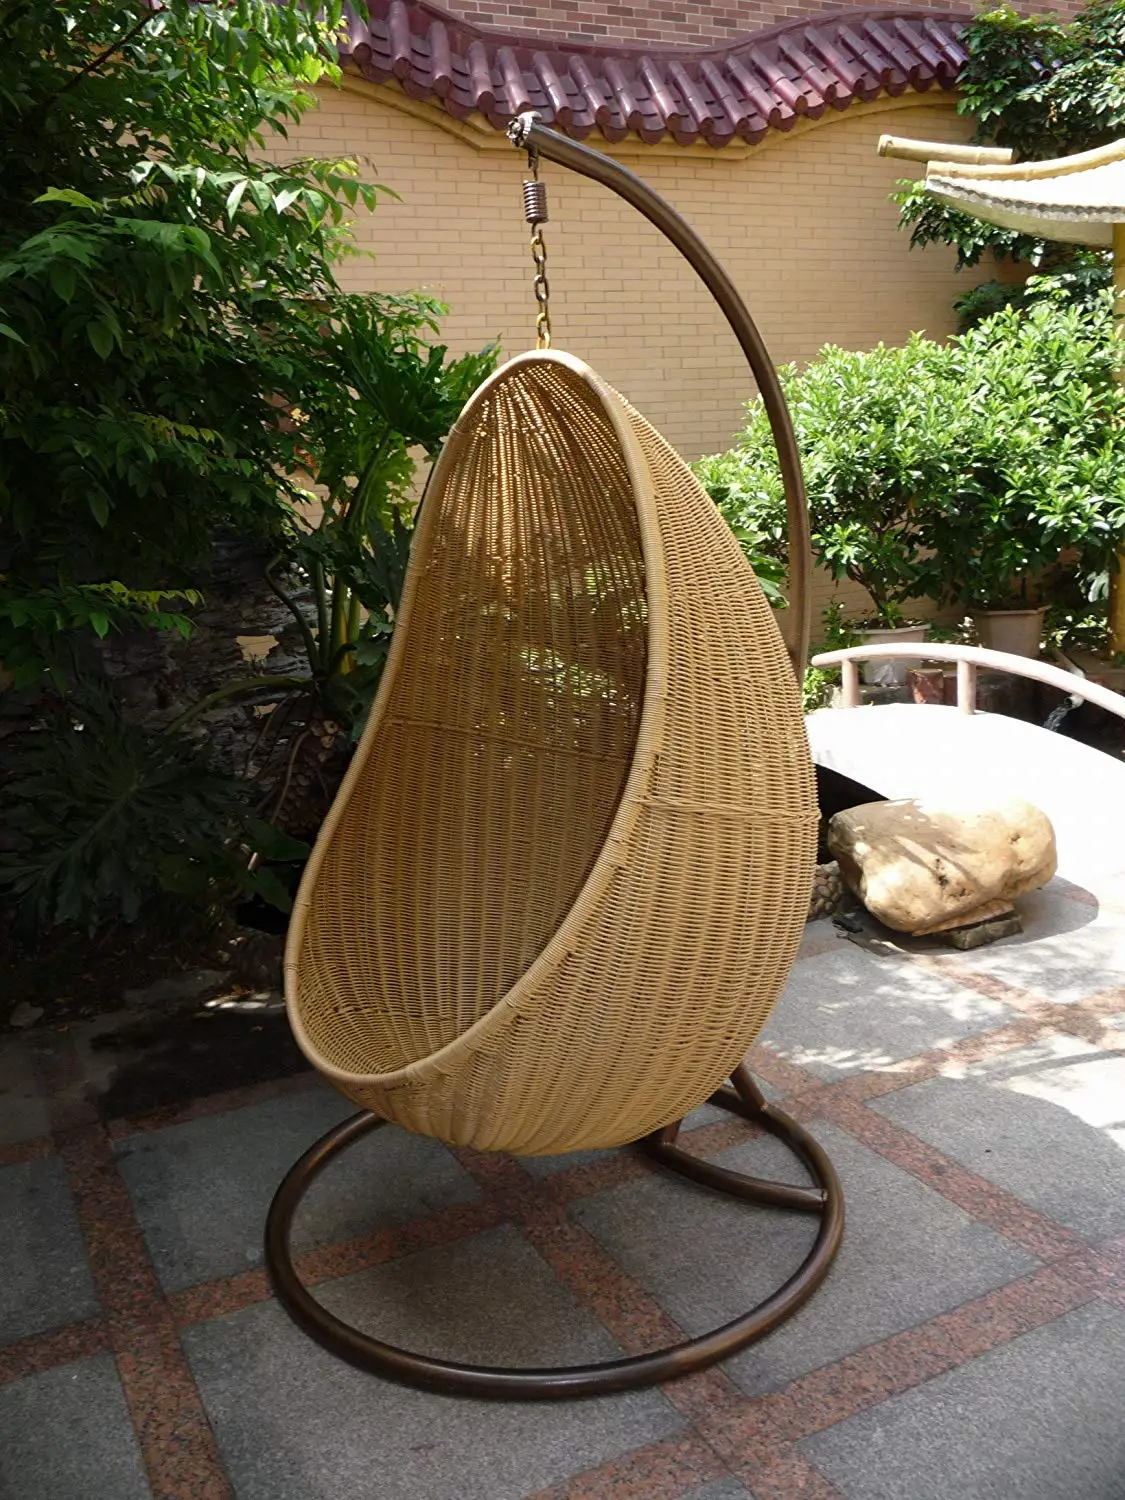 Cheap Used Hanging Chair Find Used Hanging Chair Deals On Line At